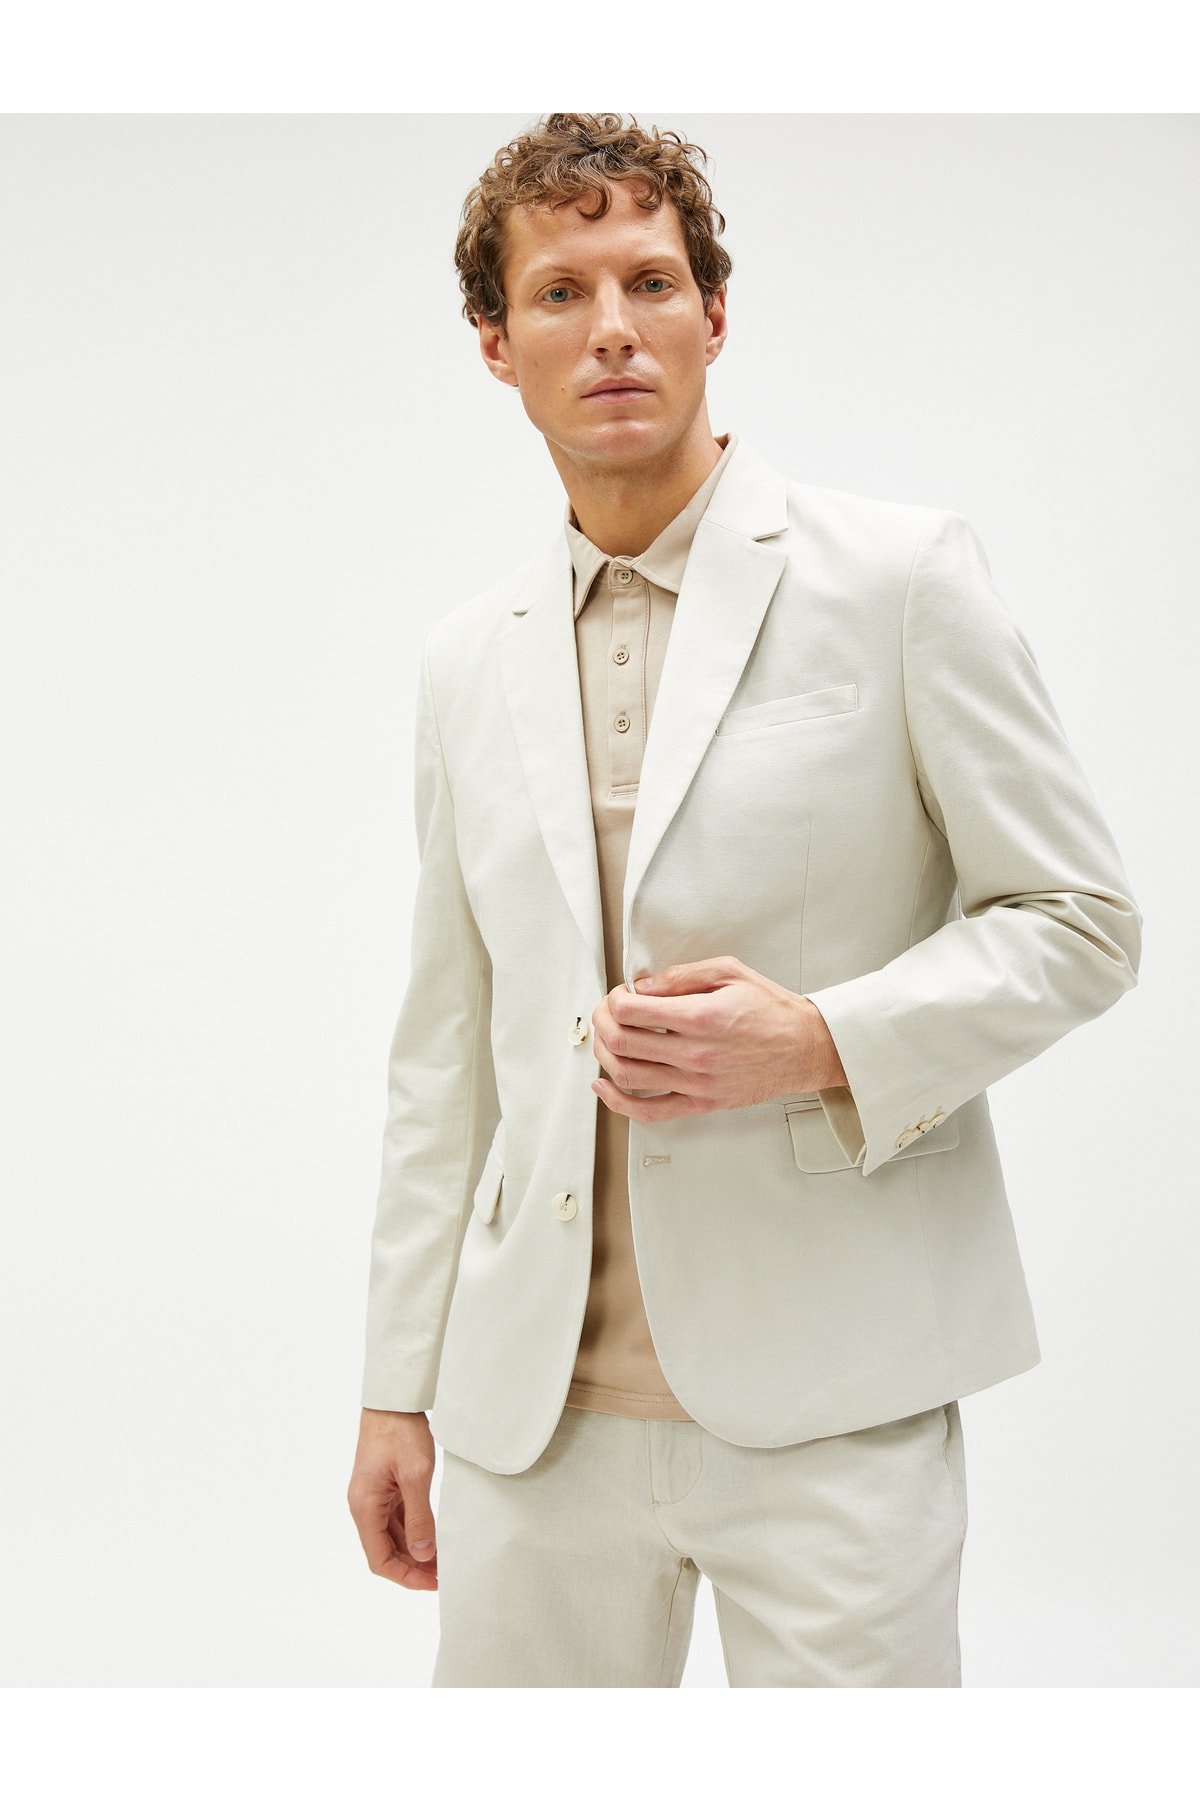 Koton Summer Jacket Blazer Linen-Mixed Pocket Detailed With Buttons.